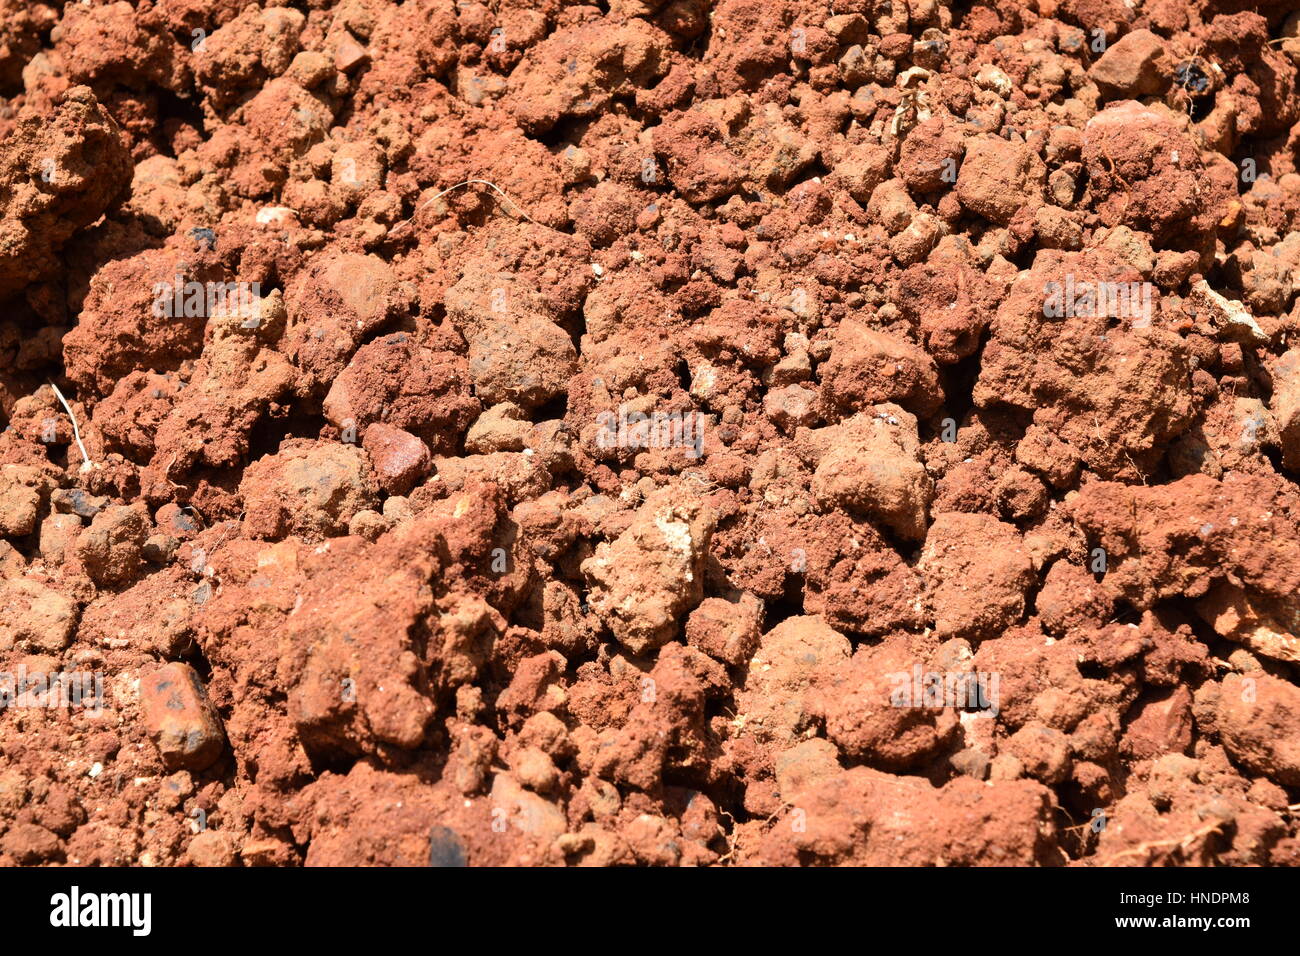 Rocks at a construction site Stock Photo